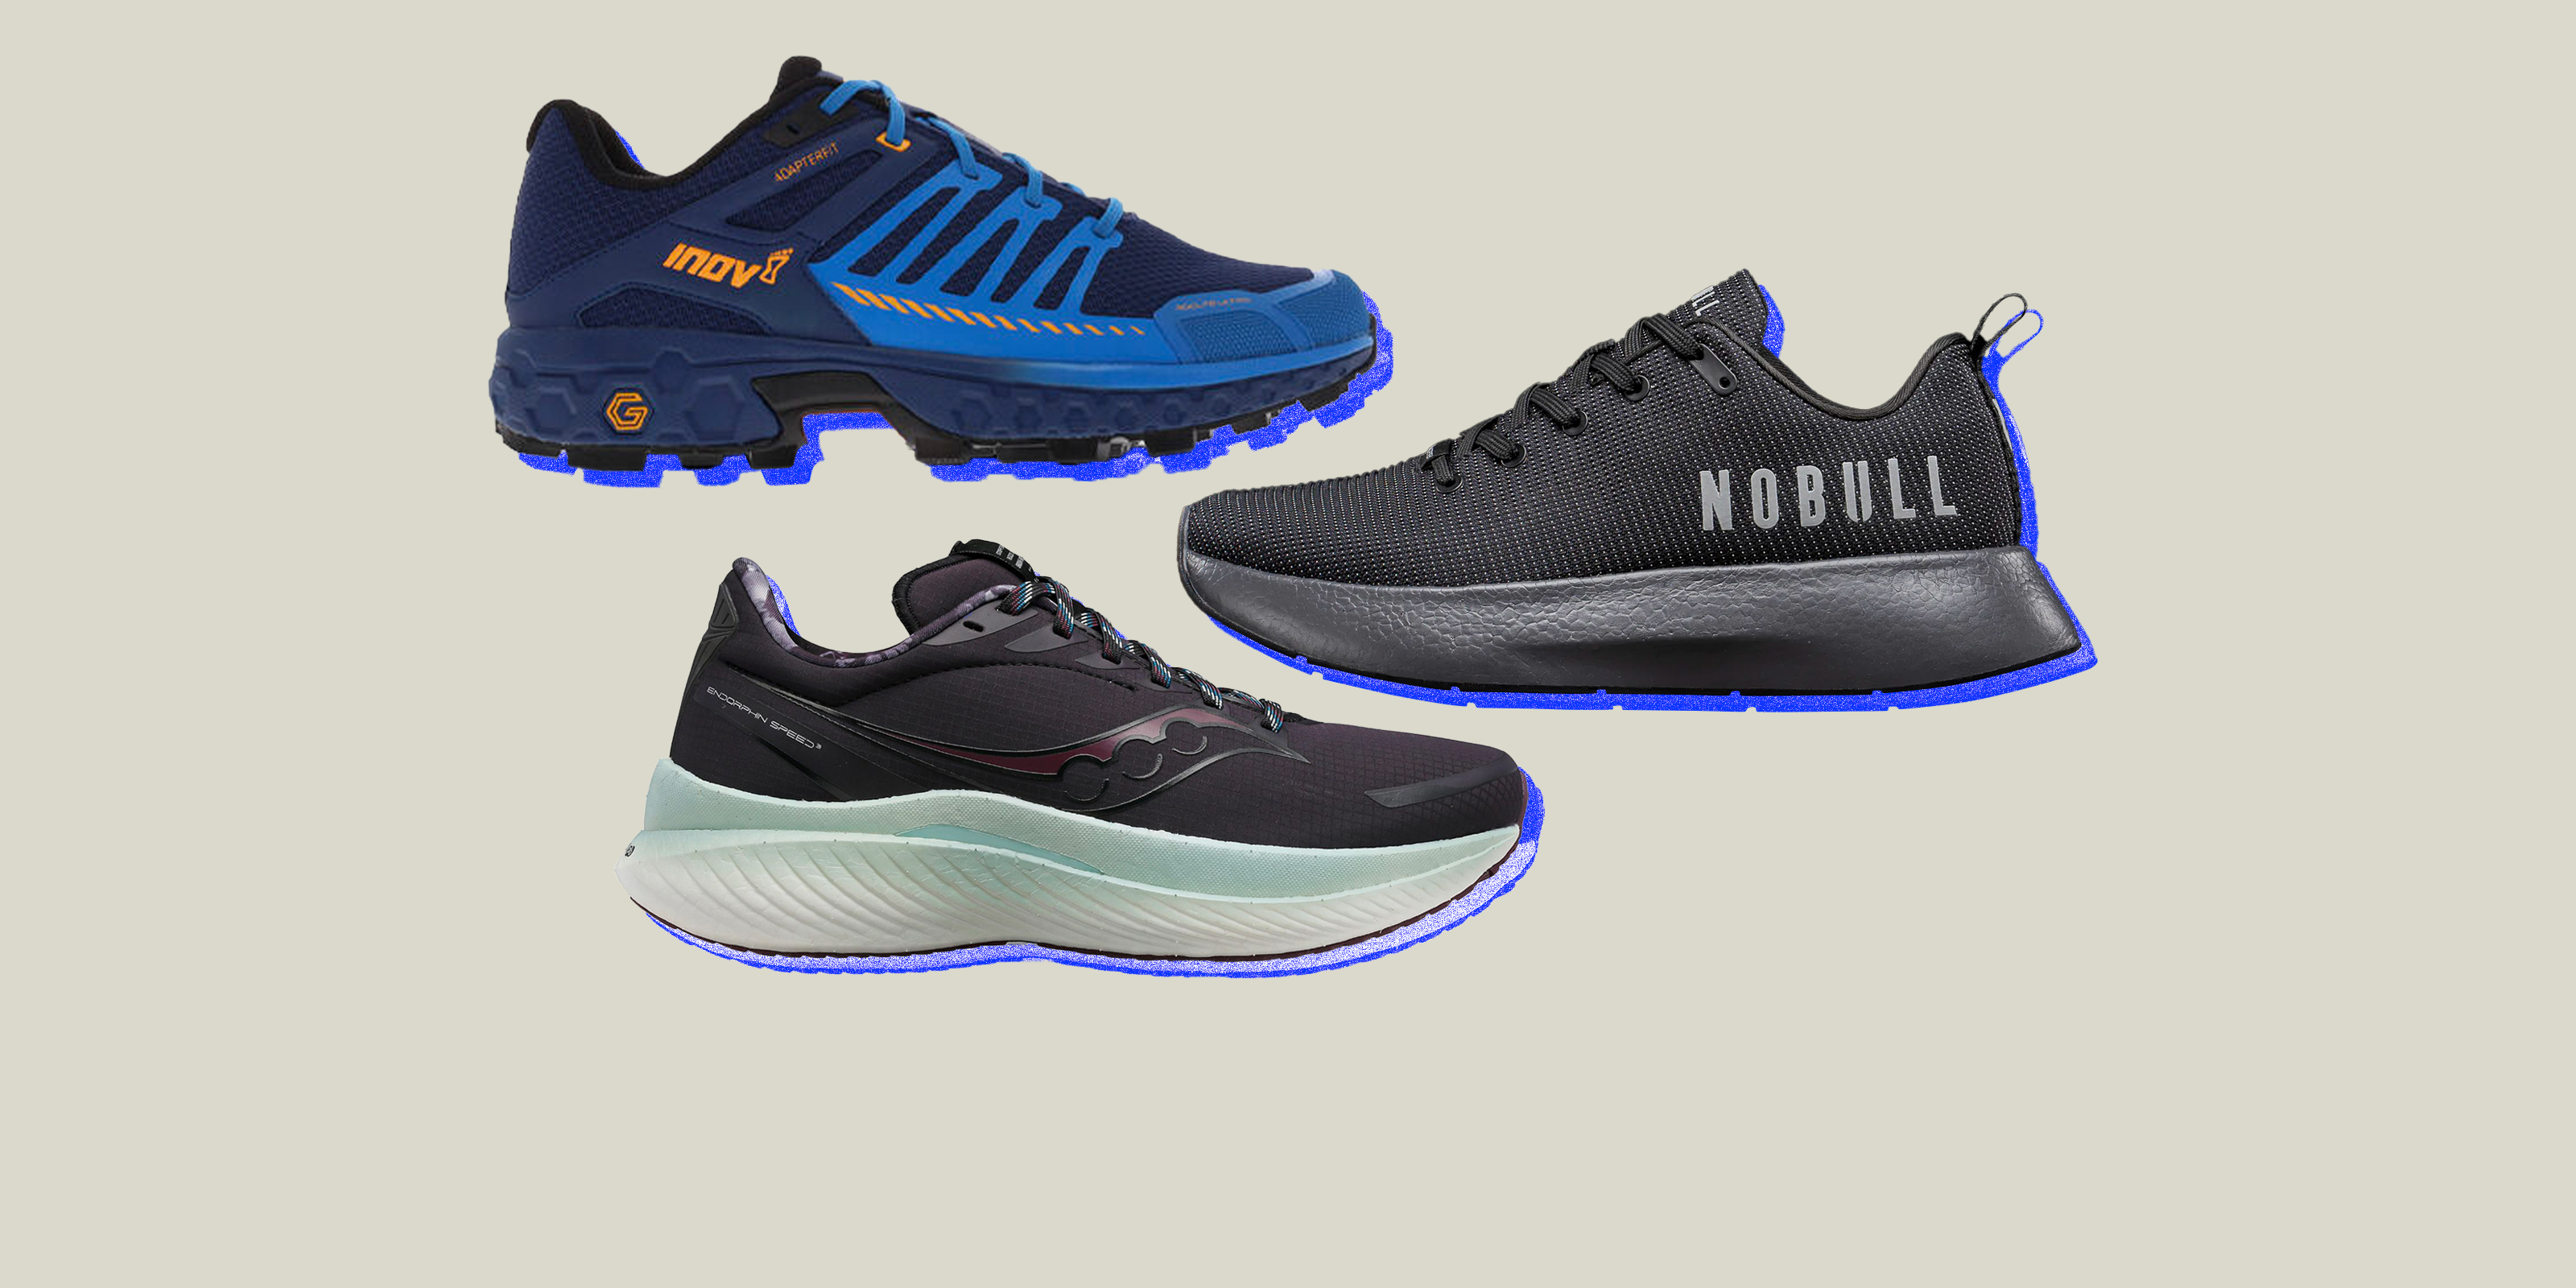 The Best Winter Running Shoes for Trekking Through the Chills